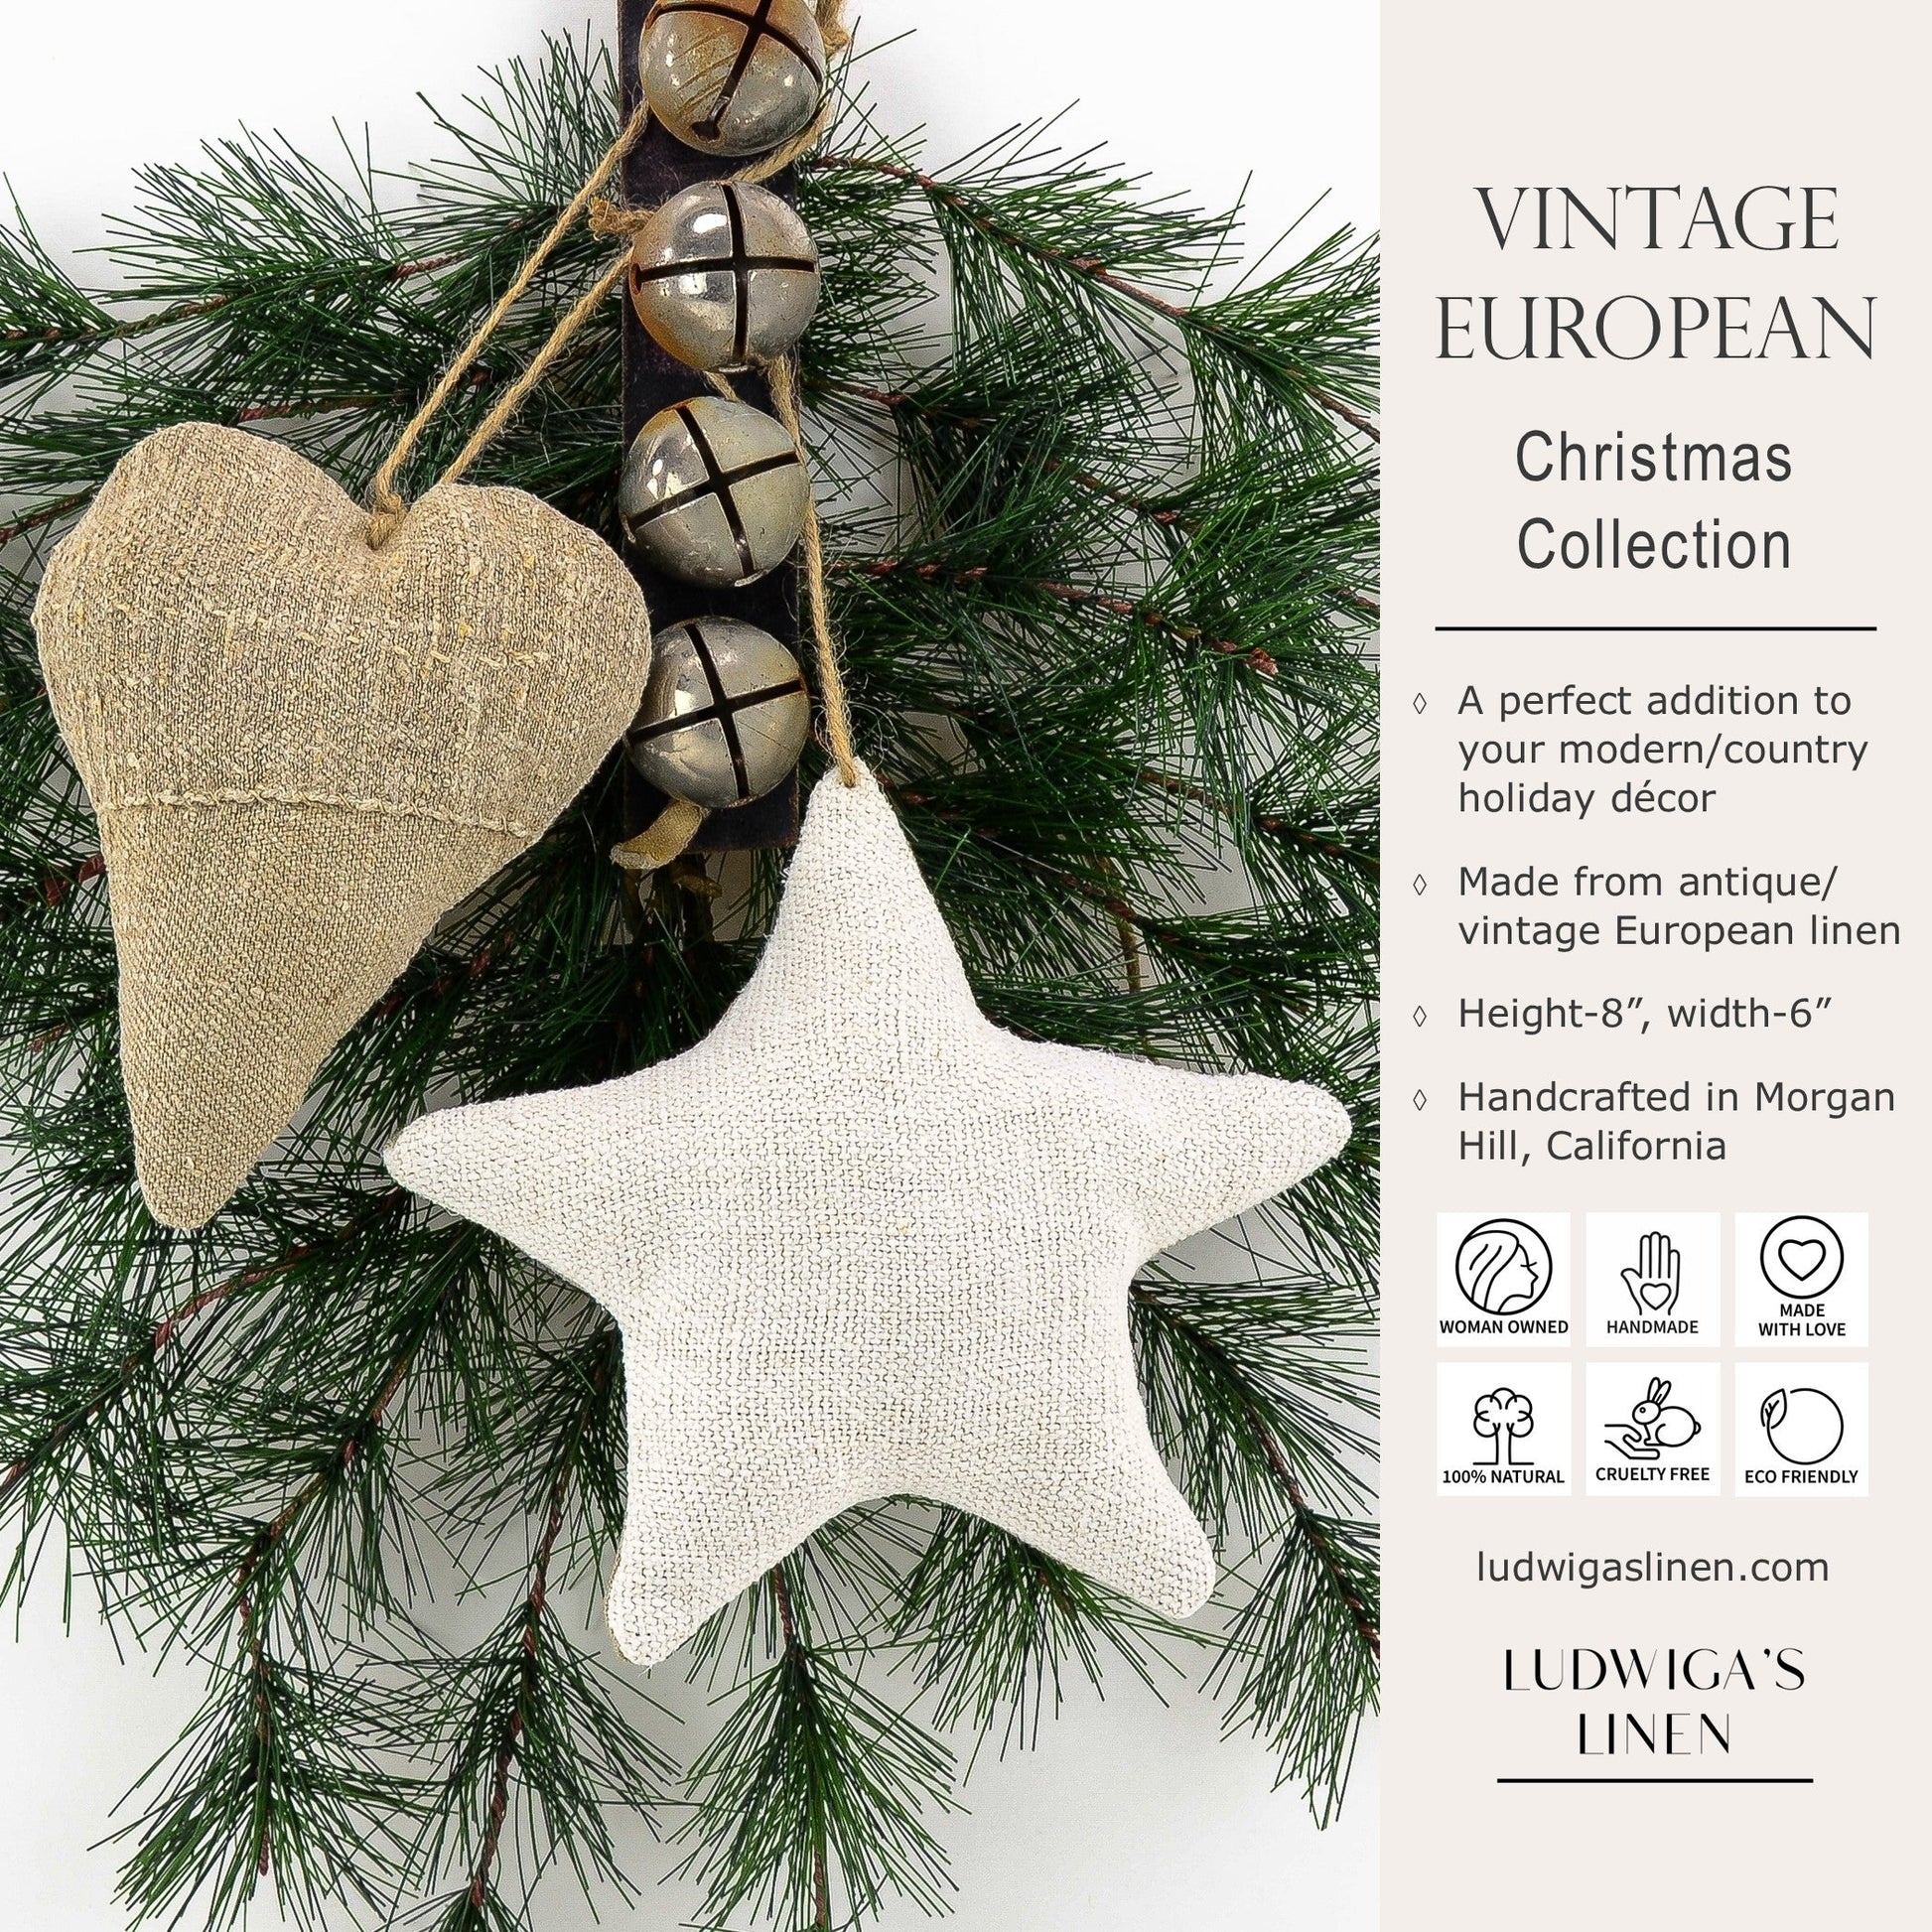 Christmas/holiday ornament - antique European grain sack linen heart and star fastened together with twine